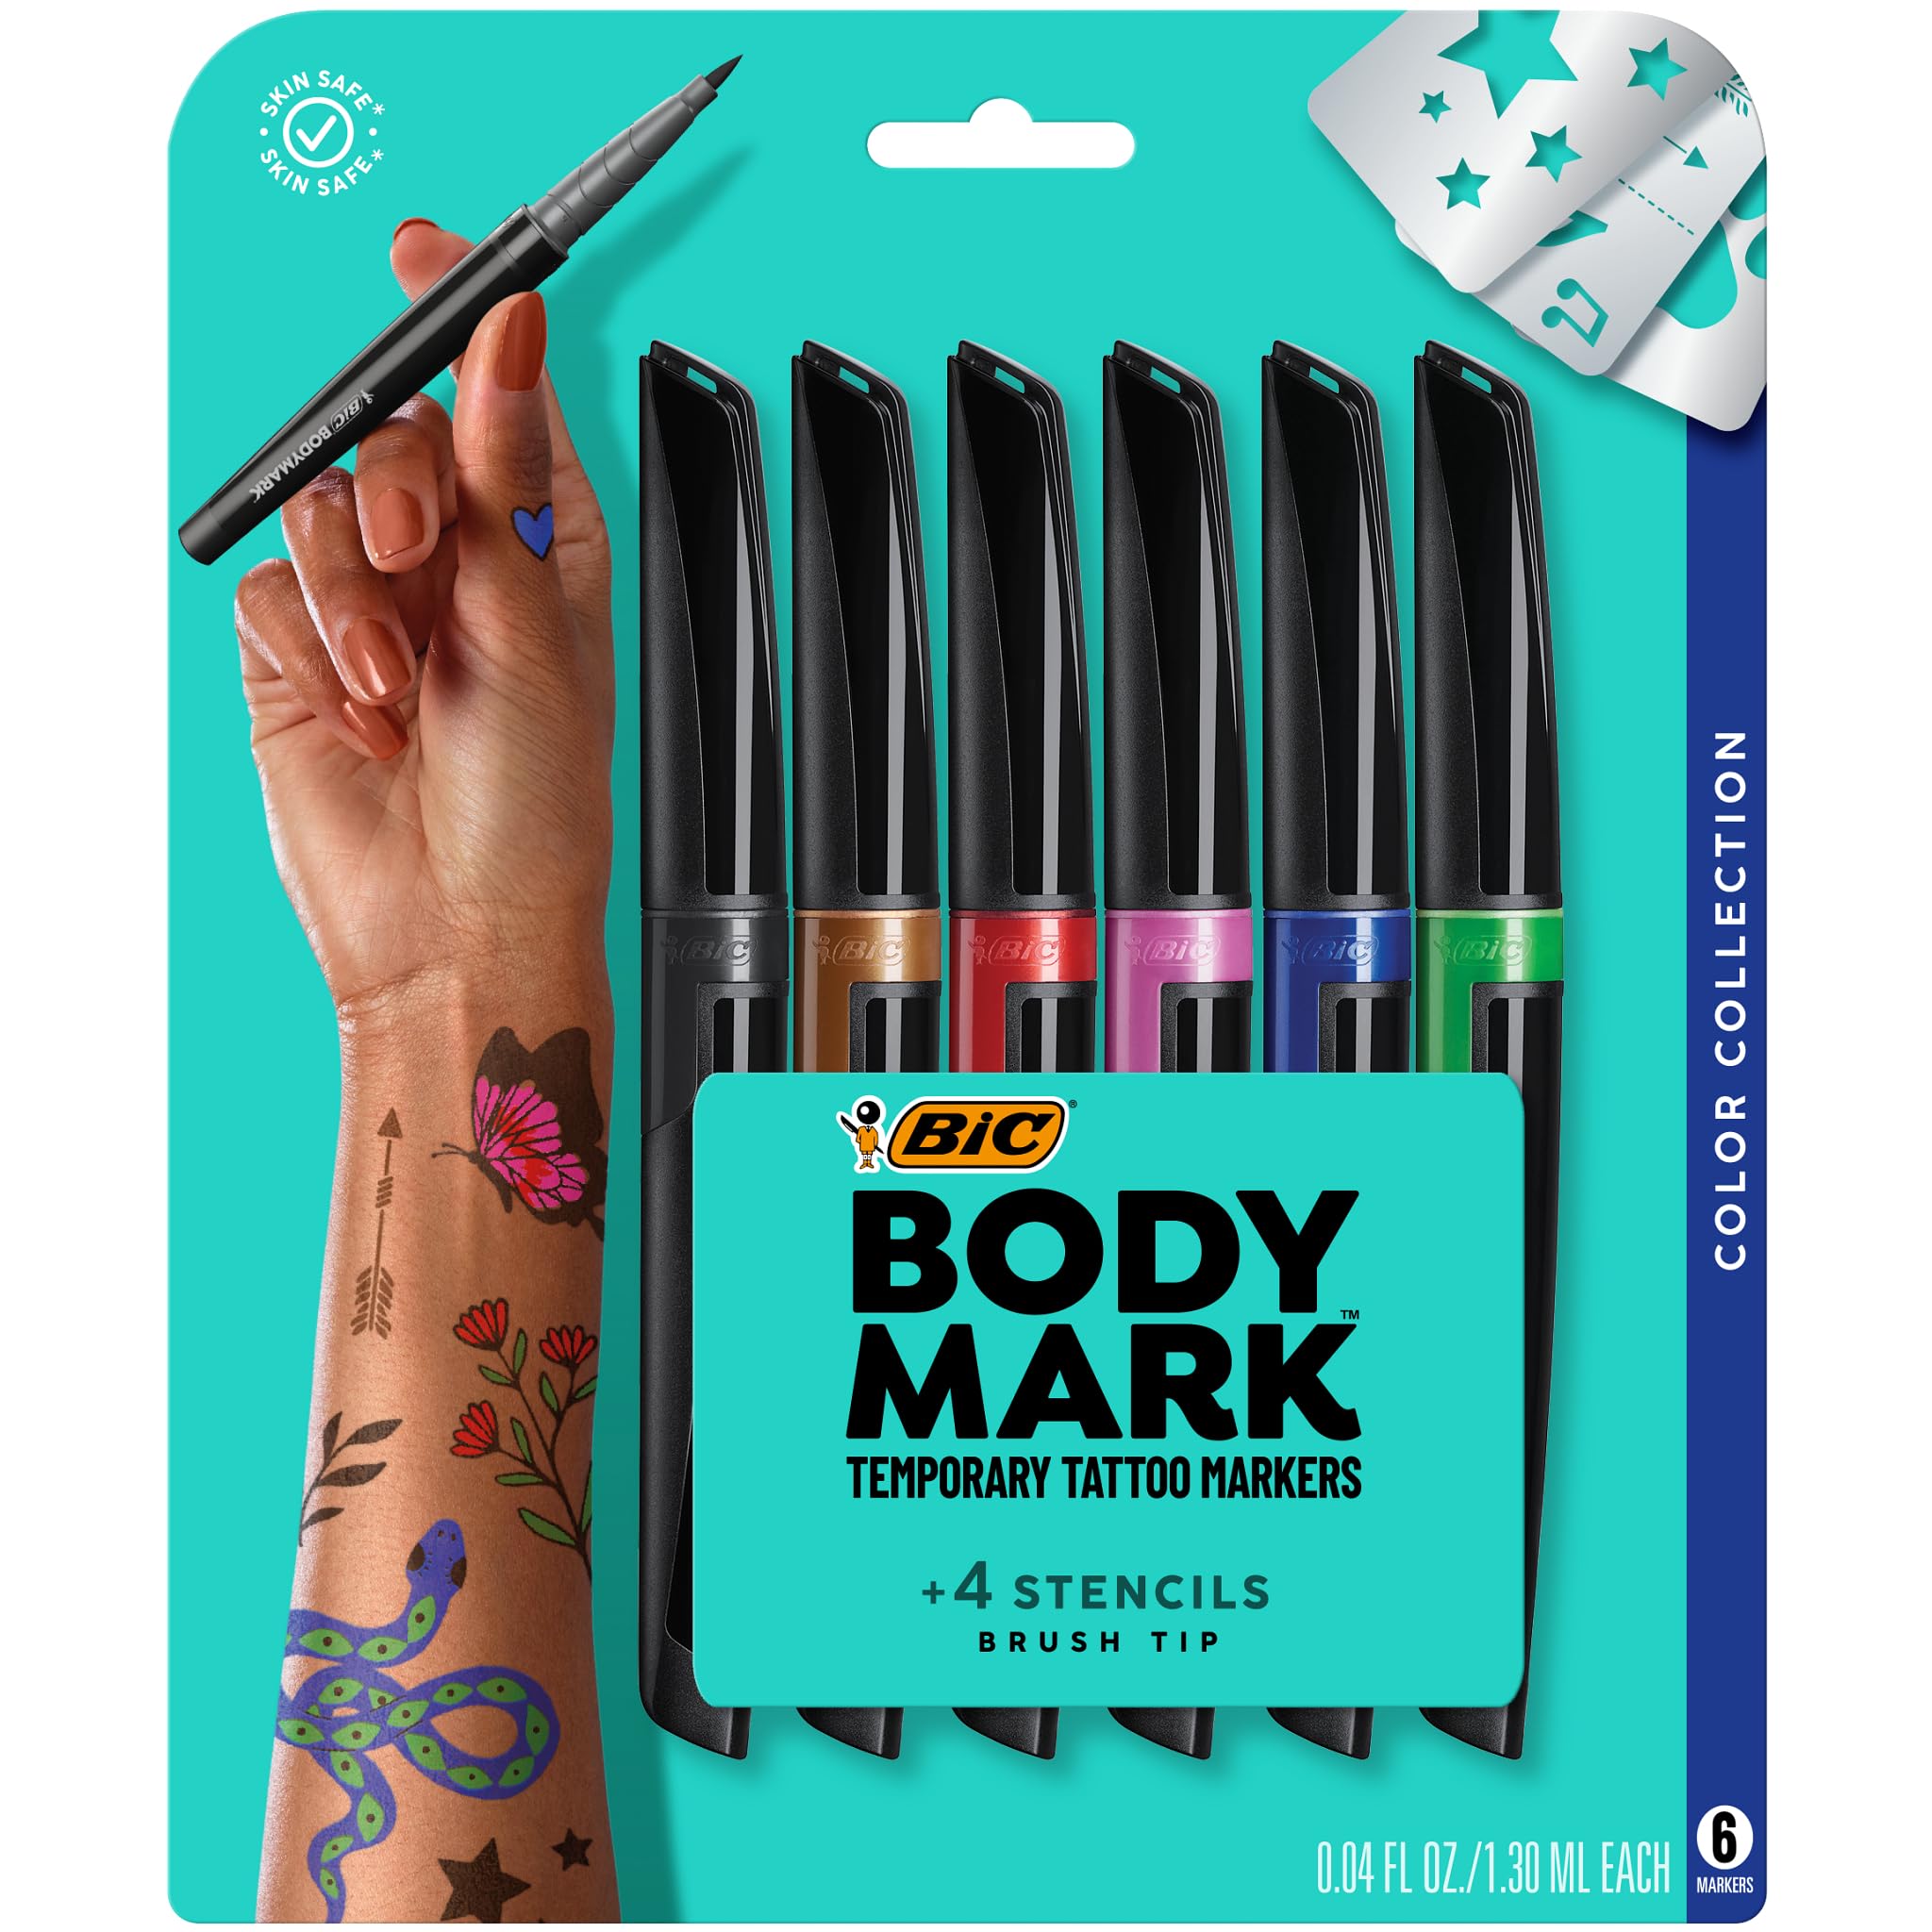 BodyMark BIC Temporary Tattoo Markers for Skin, Color Collection, Flexible Brush Tip, Assorted Colors, Skin-Safe*, Cosmetic Quality, 6-Count